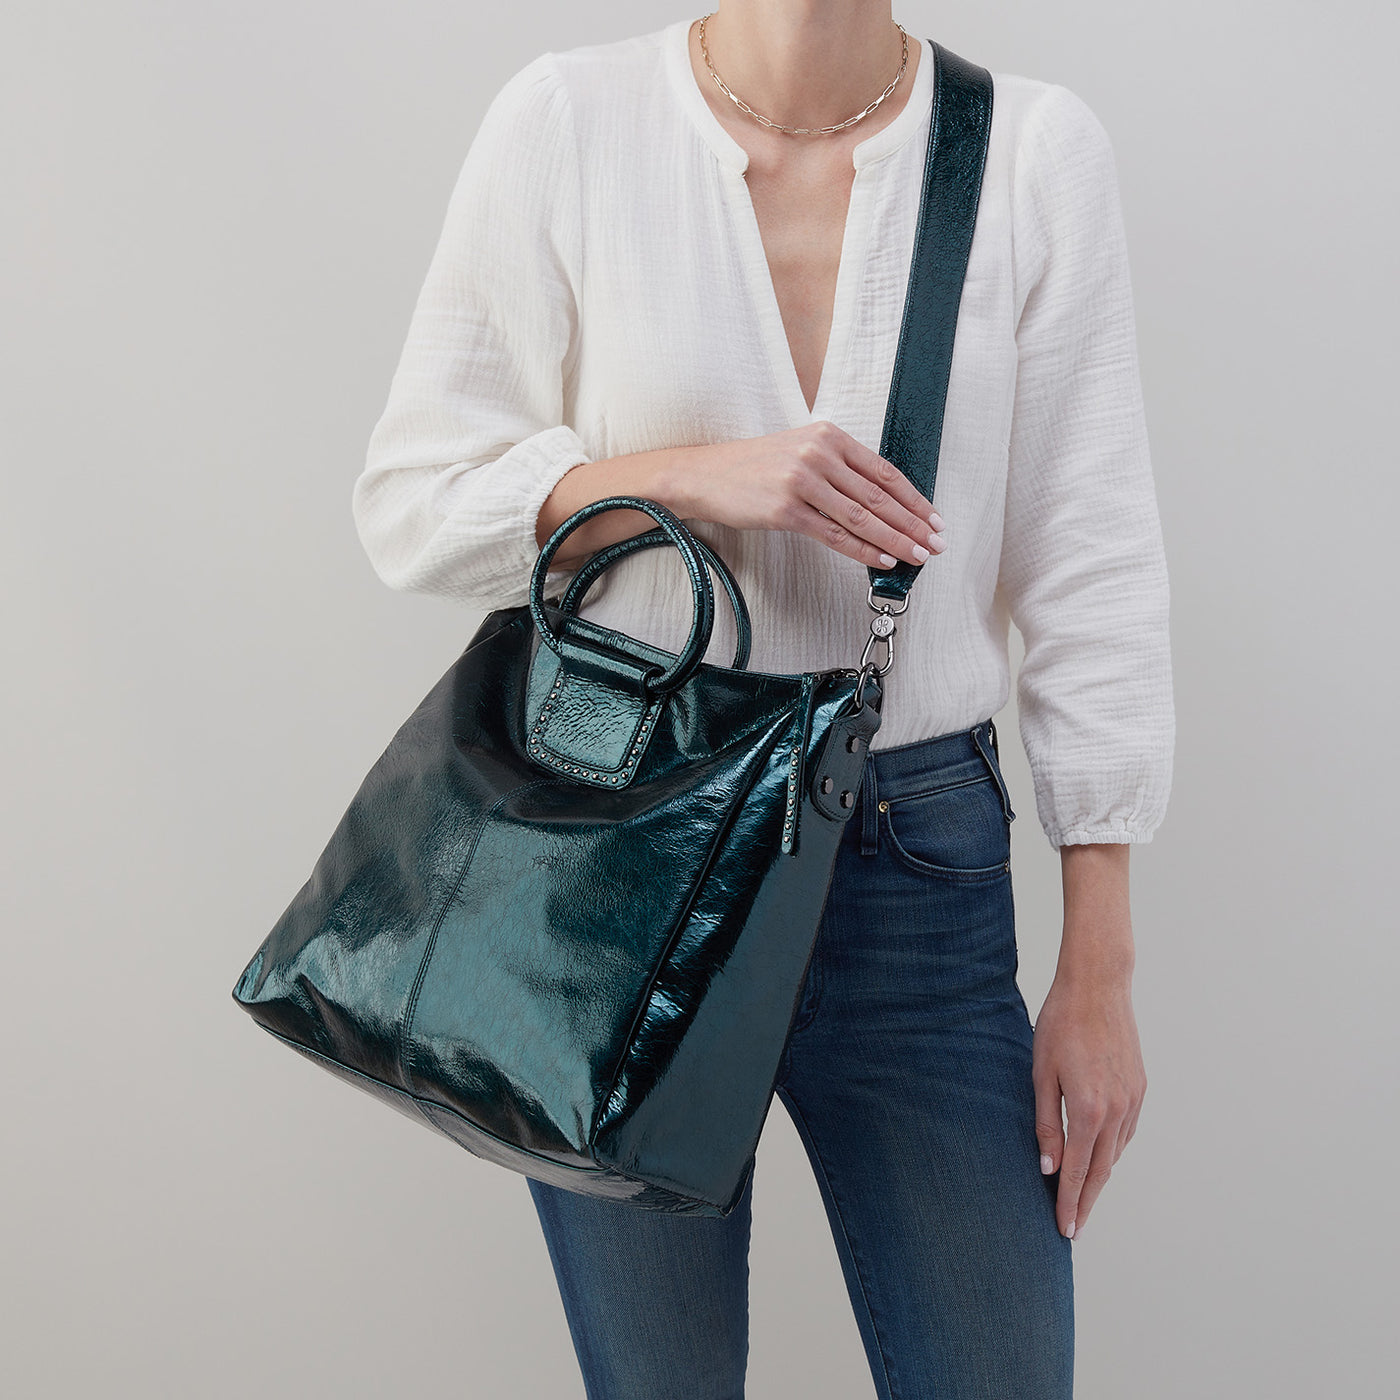 Sheila Large Satchel in Patent Leather - Spruce Patent